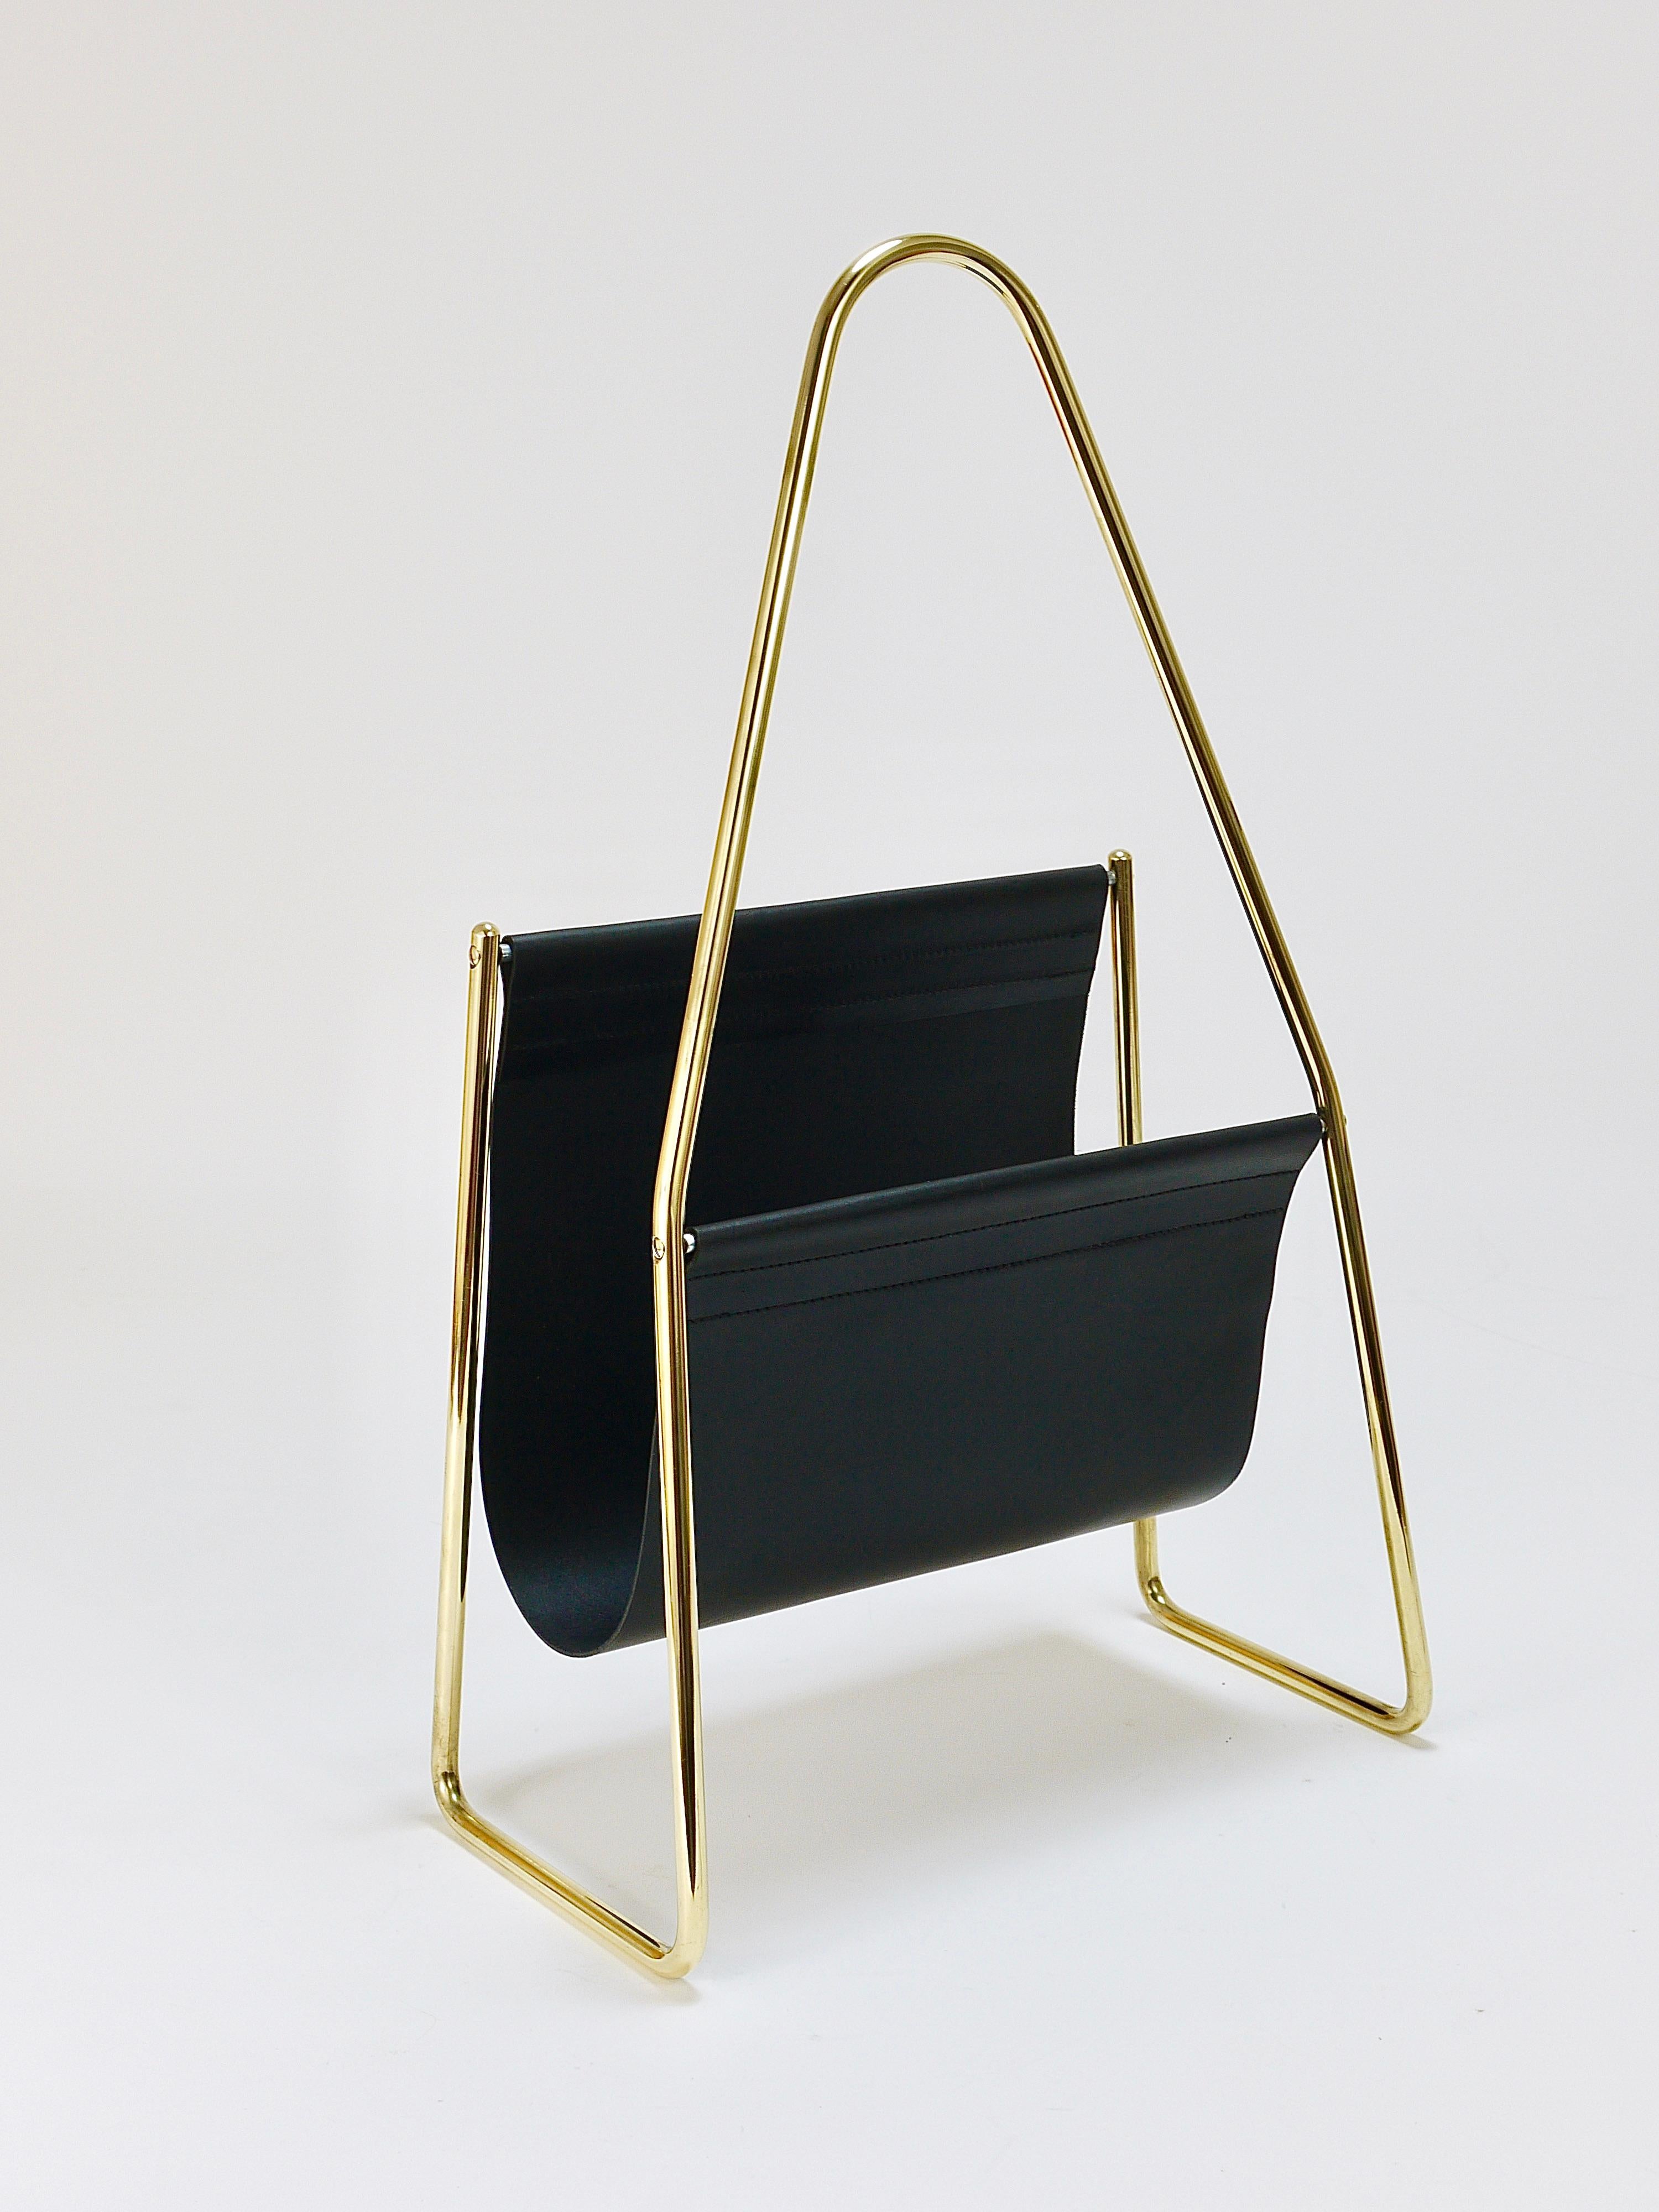 A beautiful modernist original and old newspaper stand / magazine rack from the 1950s. Model No. 3808. Designed and manufactured by Carl Auböck, Austria. The news rack is in very good condition, its solid brass frame has been polished by hand, the